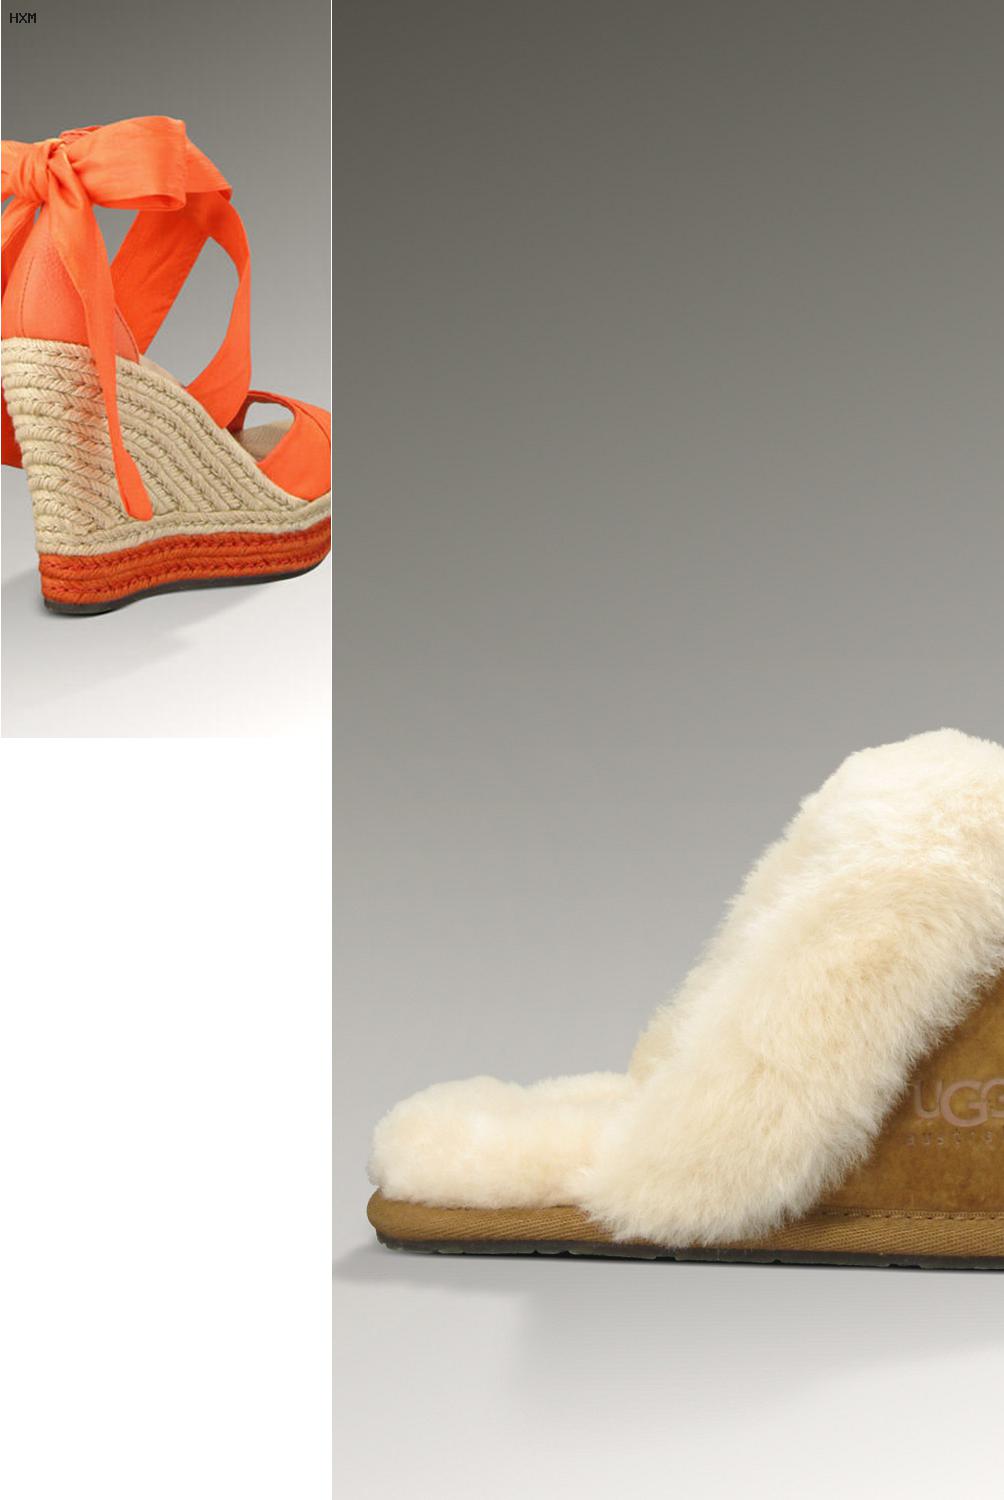 ugg australia boots outlet store